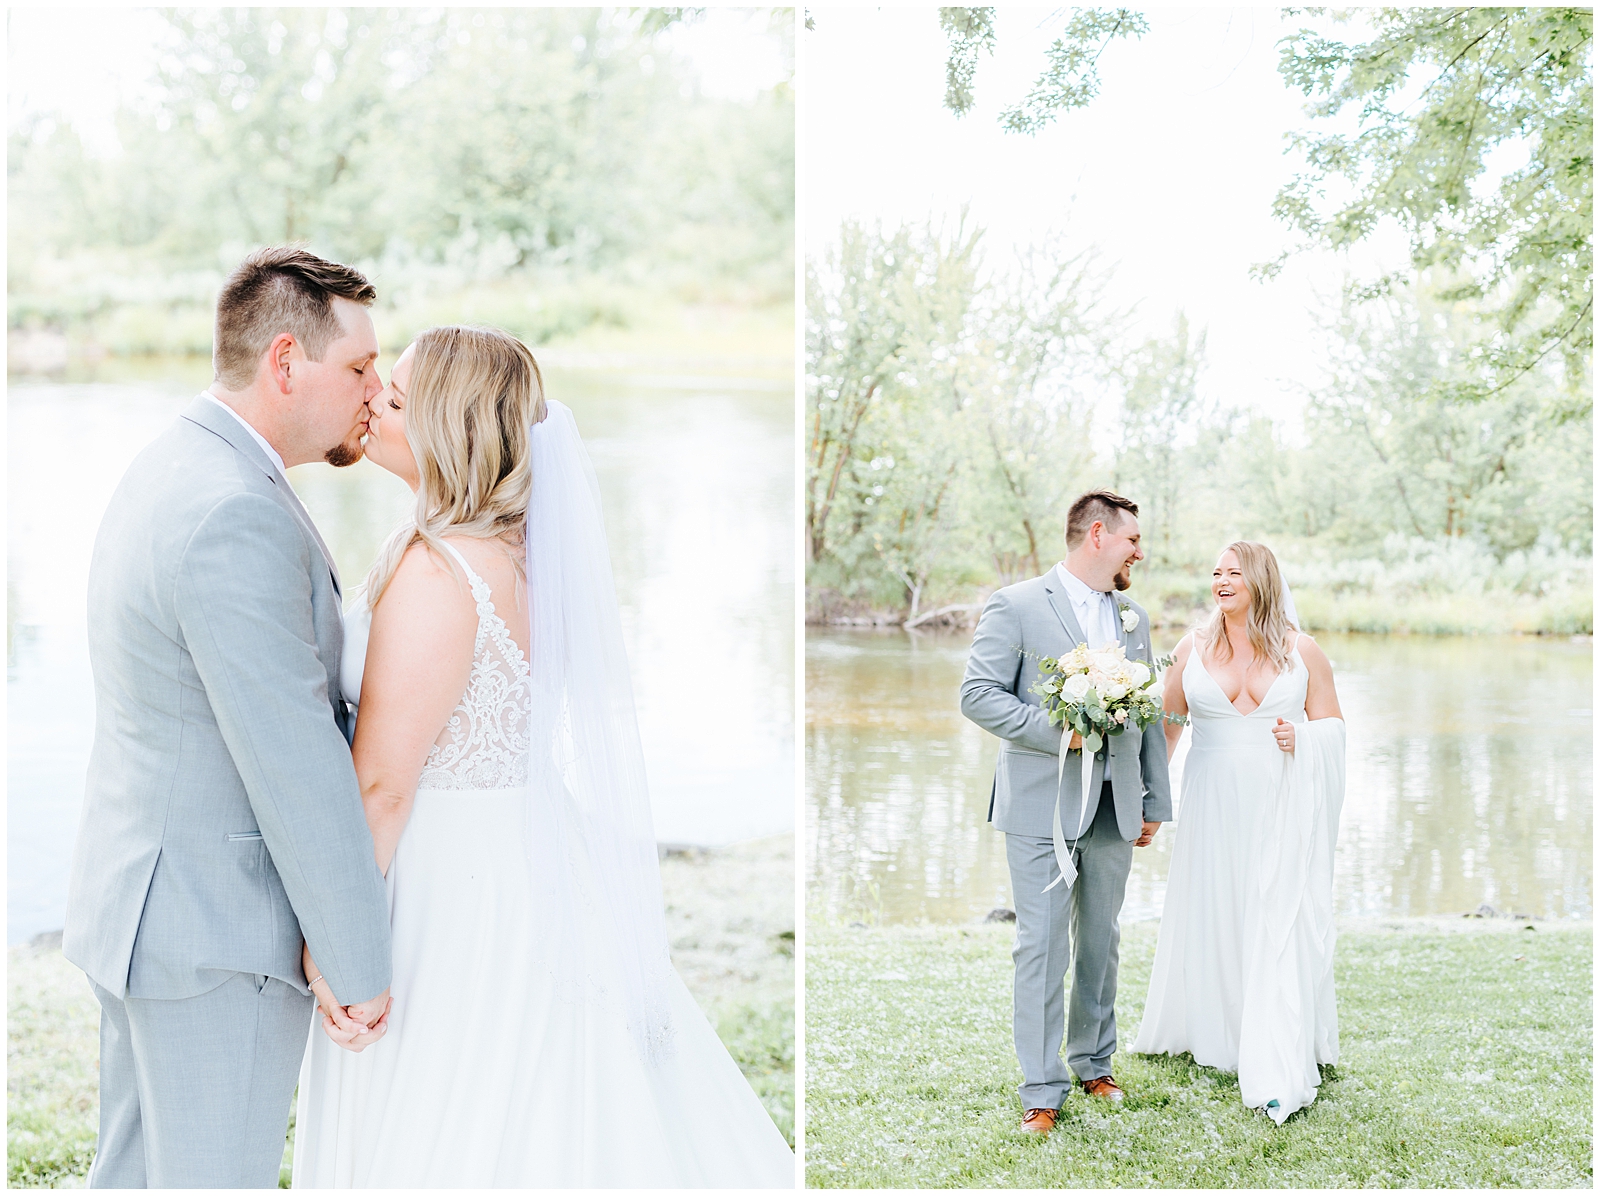 Bride and Groom Portraits at White Willow Estate Wedding